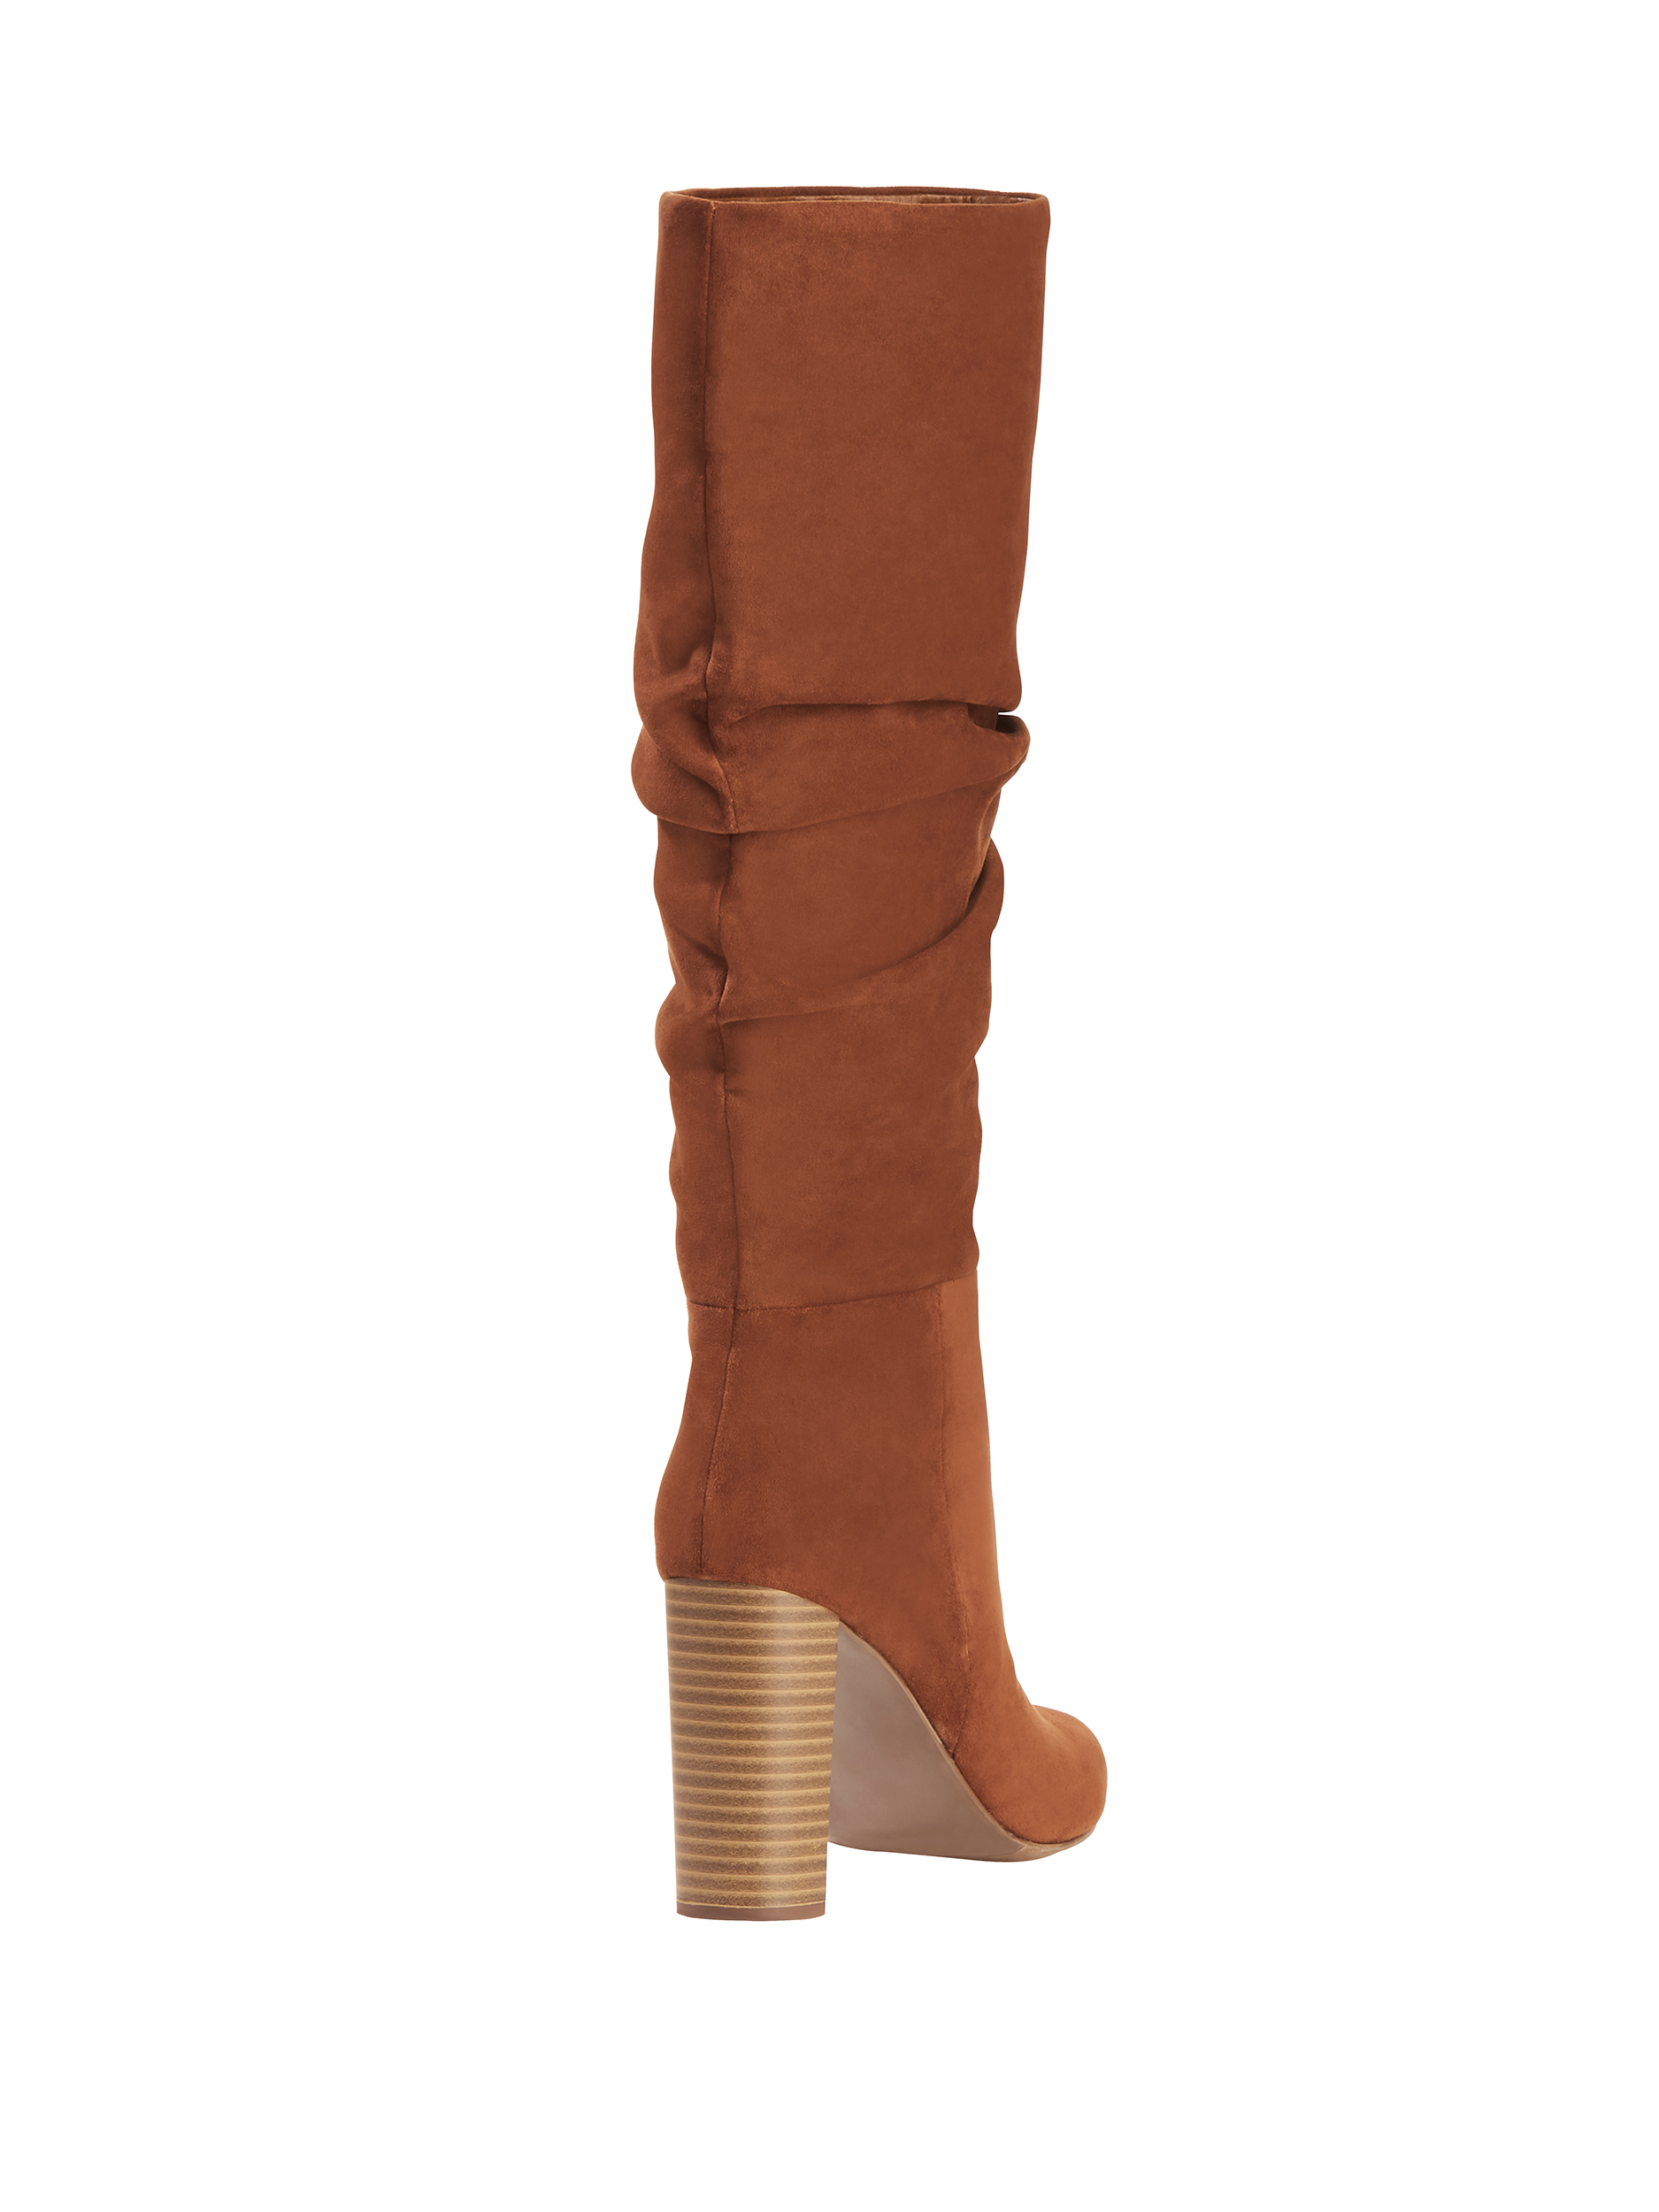 Scoop Women’s Penny Microsuede Slouch Boots - image 4 of 6